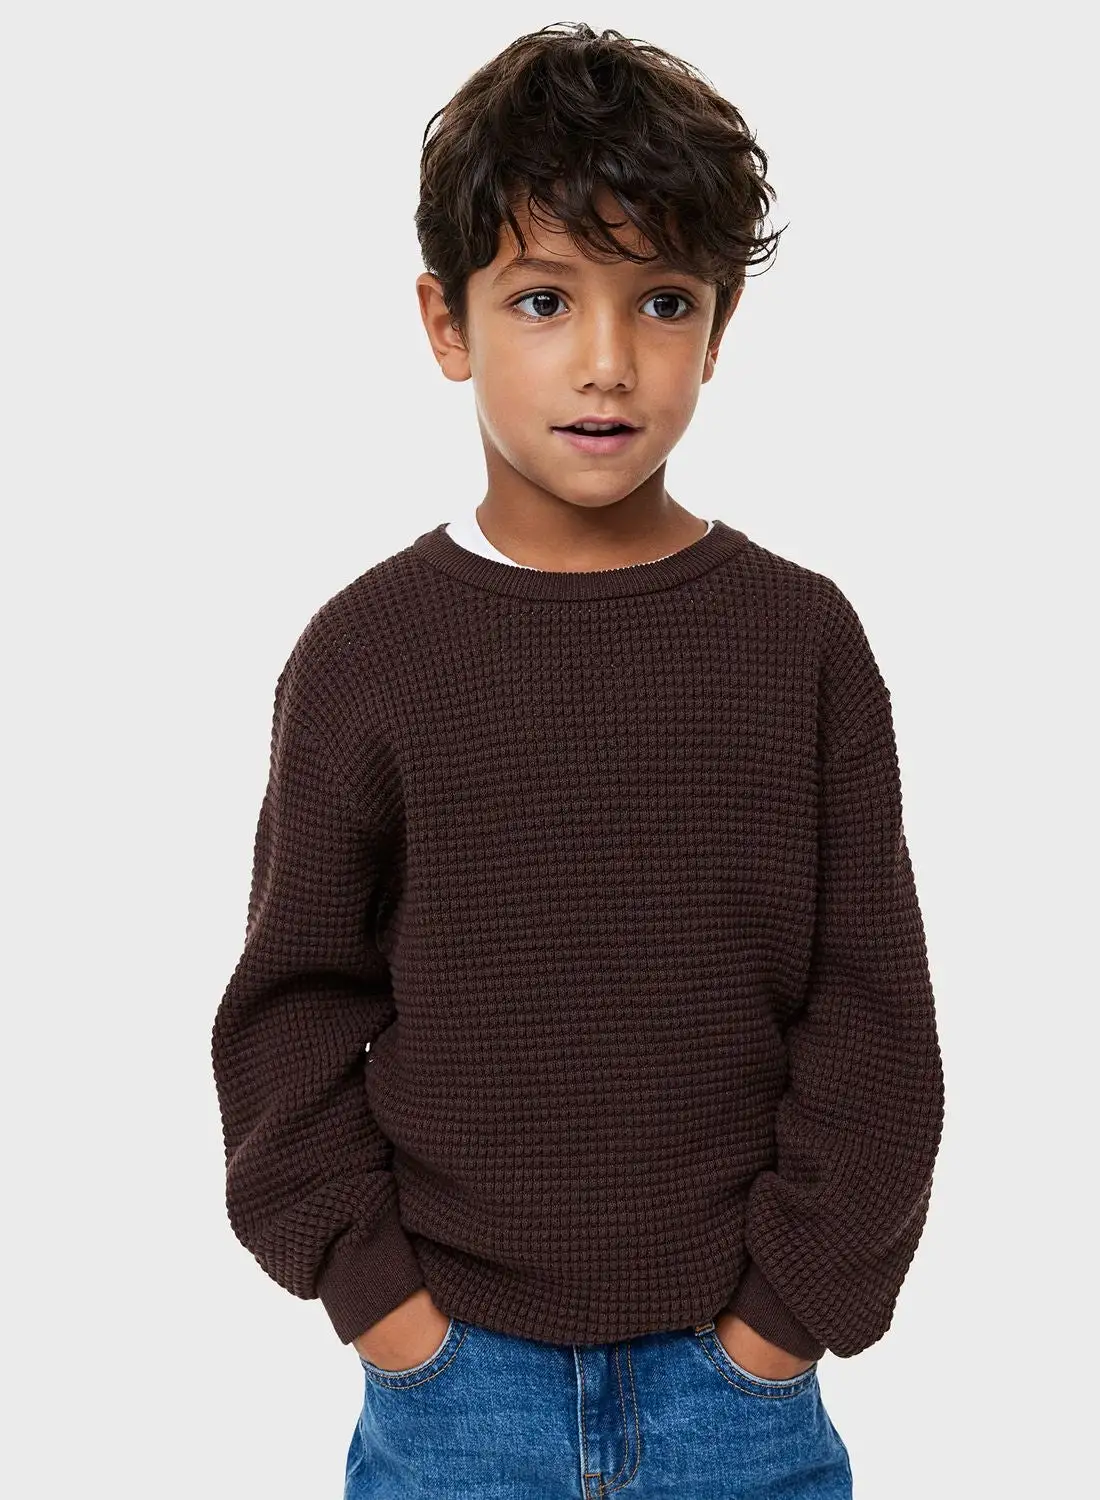 H&M Kids Essential Waffle Knit Sweater